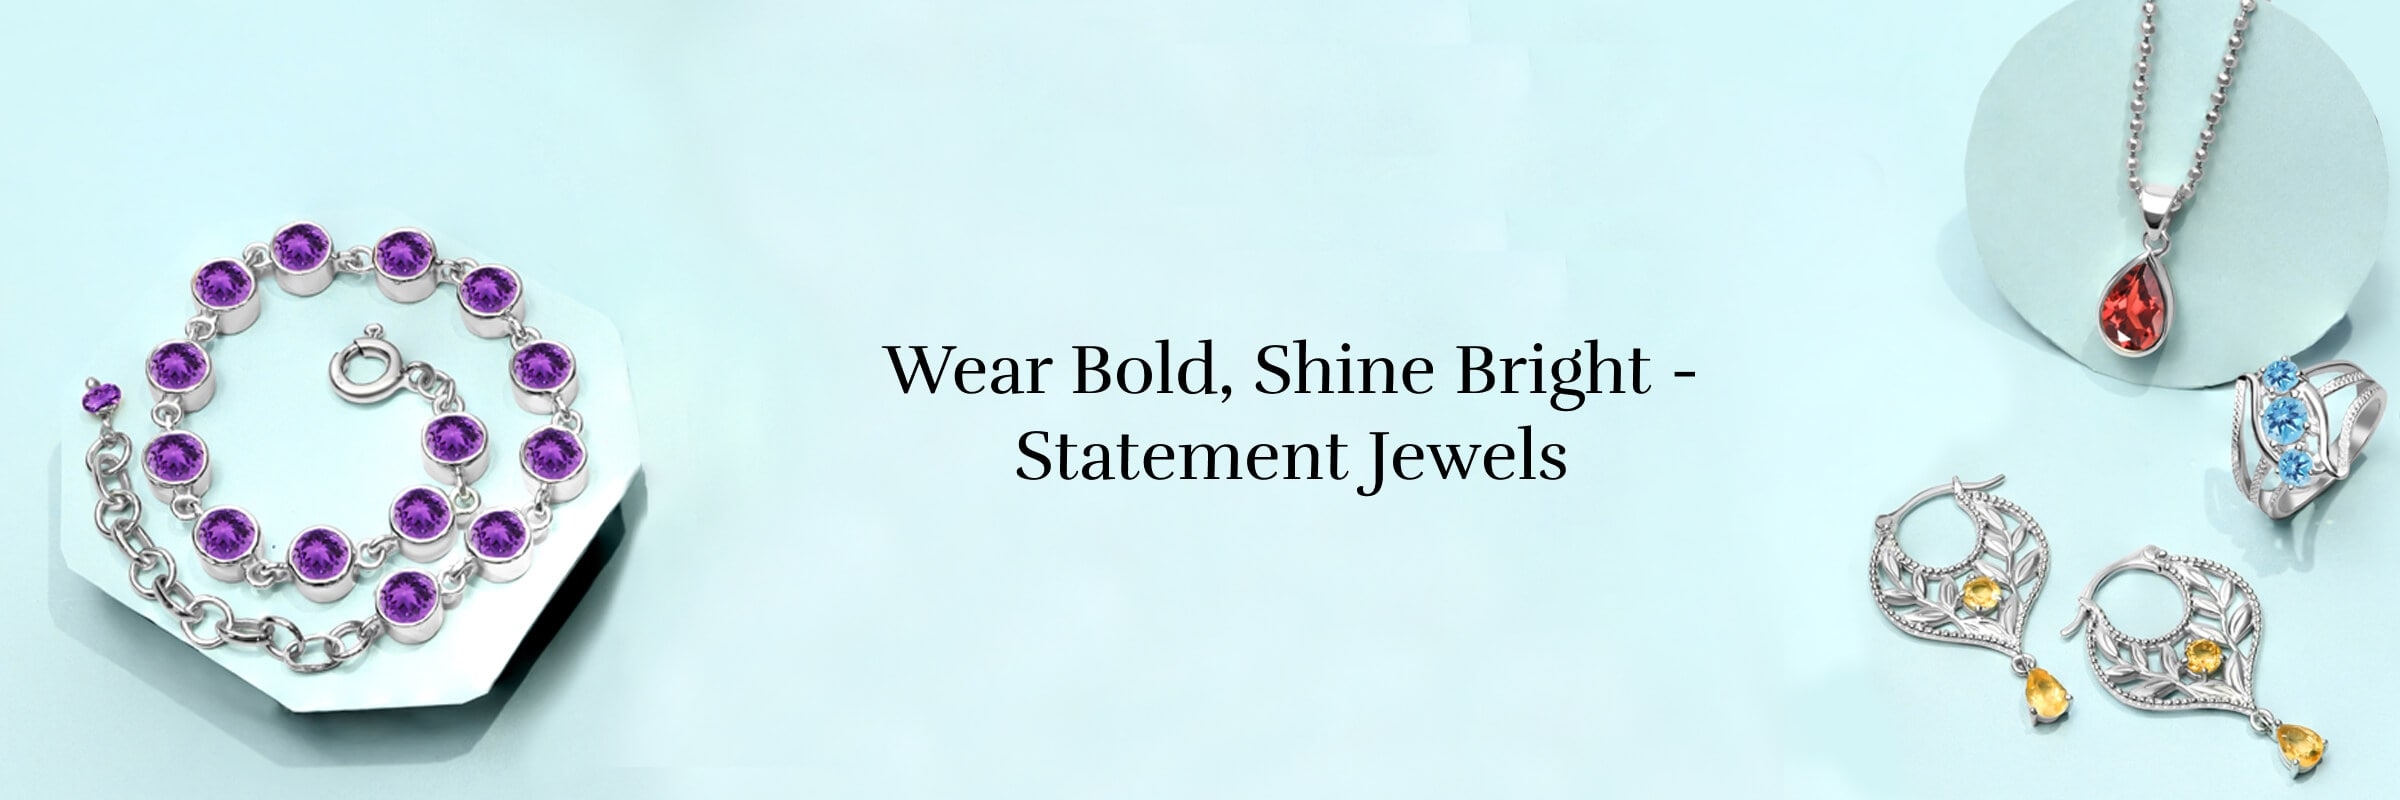 Tips on How to Wear Statement Jewelry with Confidence